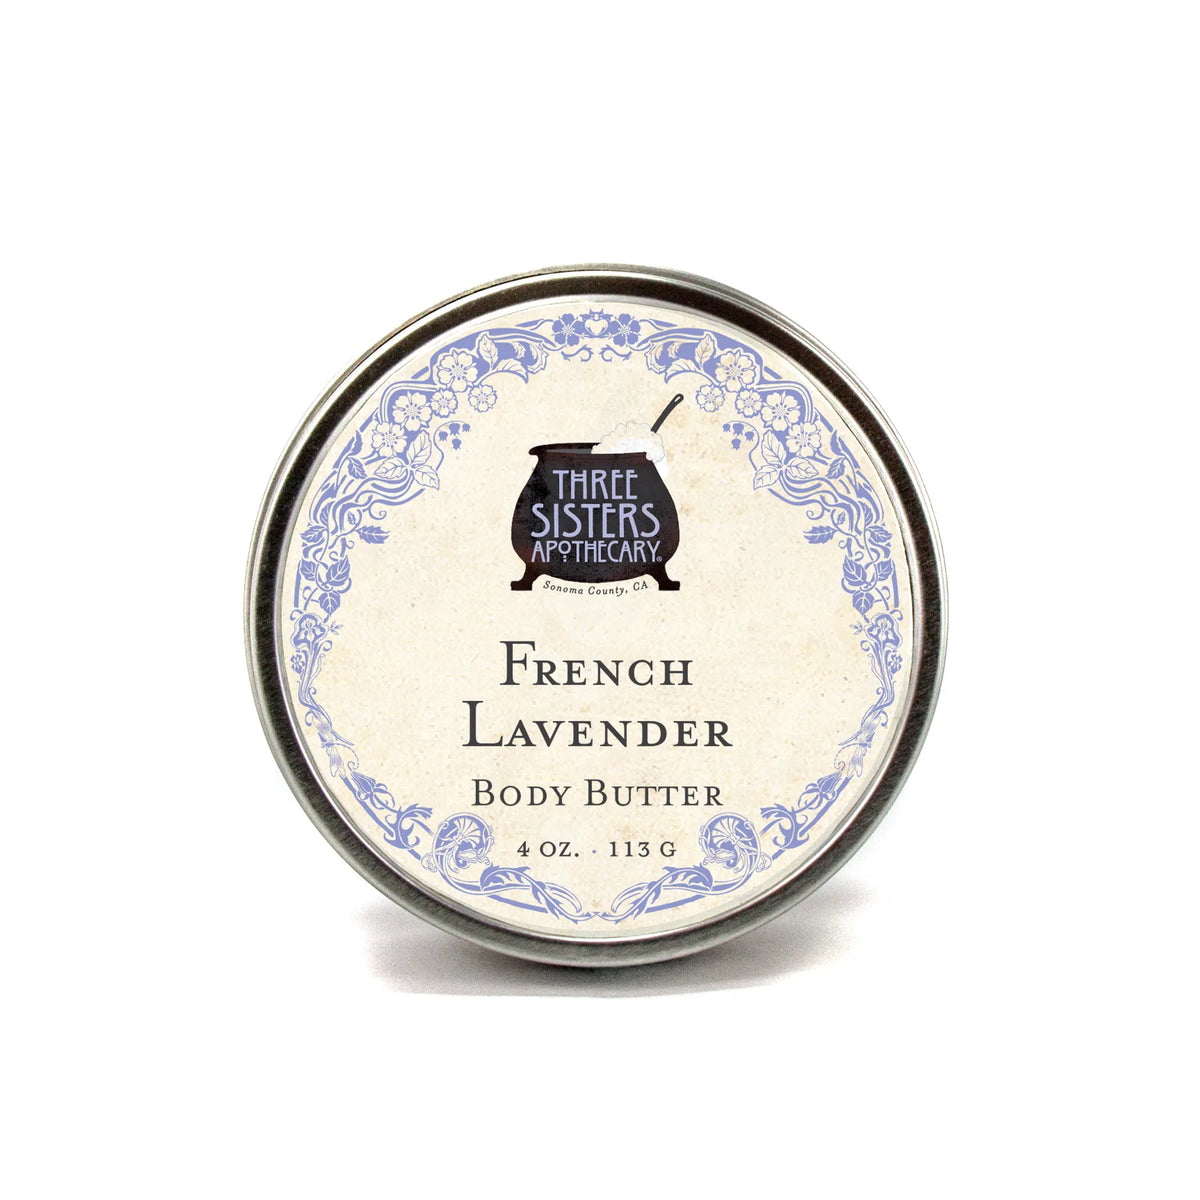 A round tin of Three Sisters Apothecary French Lavender Body Butter with a vintage-style label featuring floral designs, displayed against a plain white background.